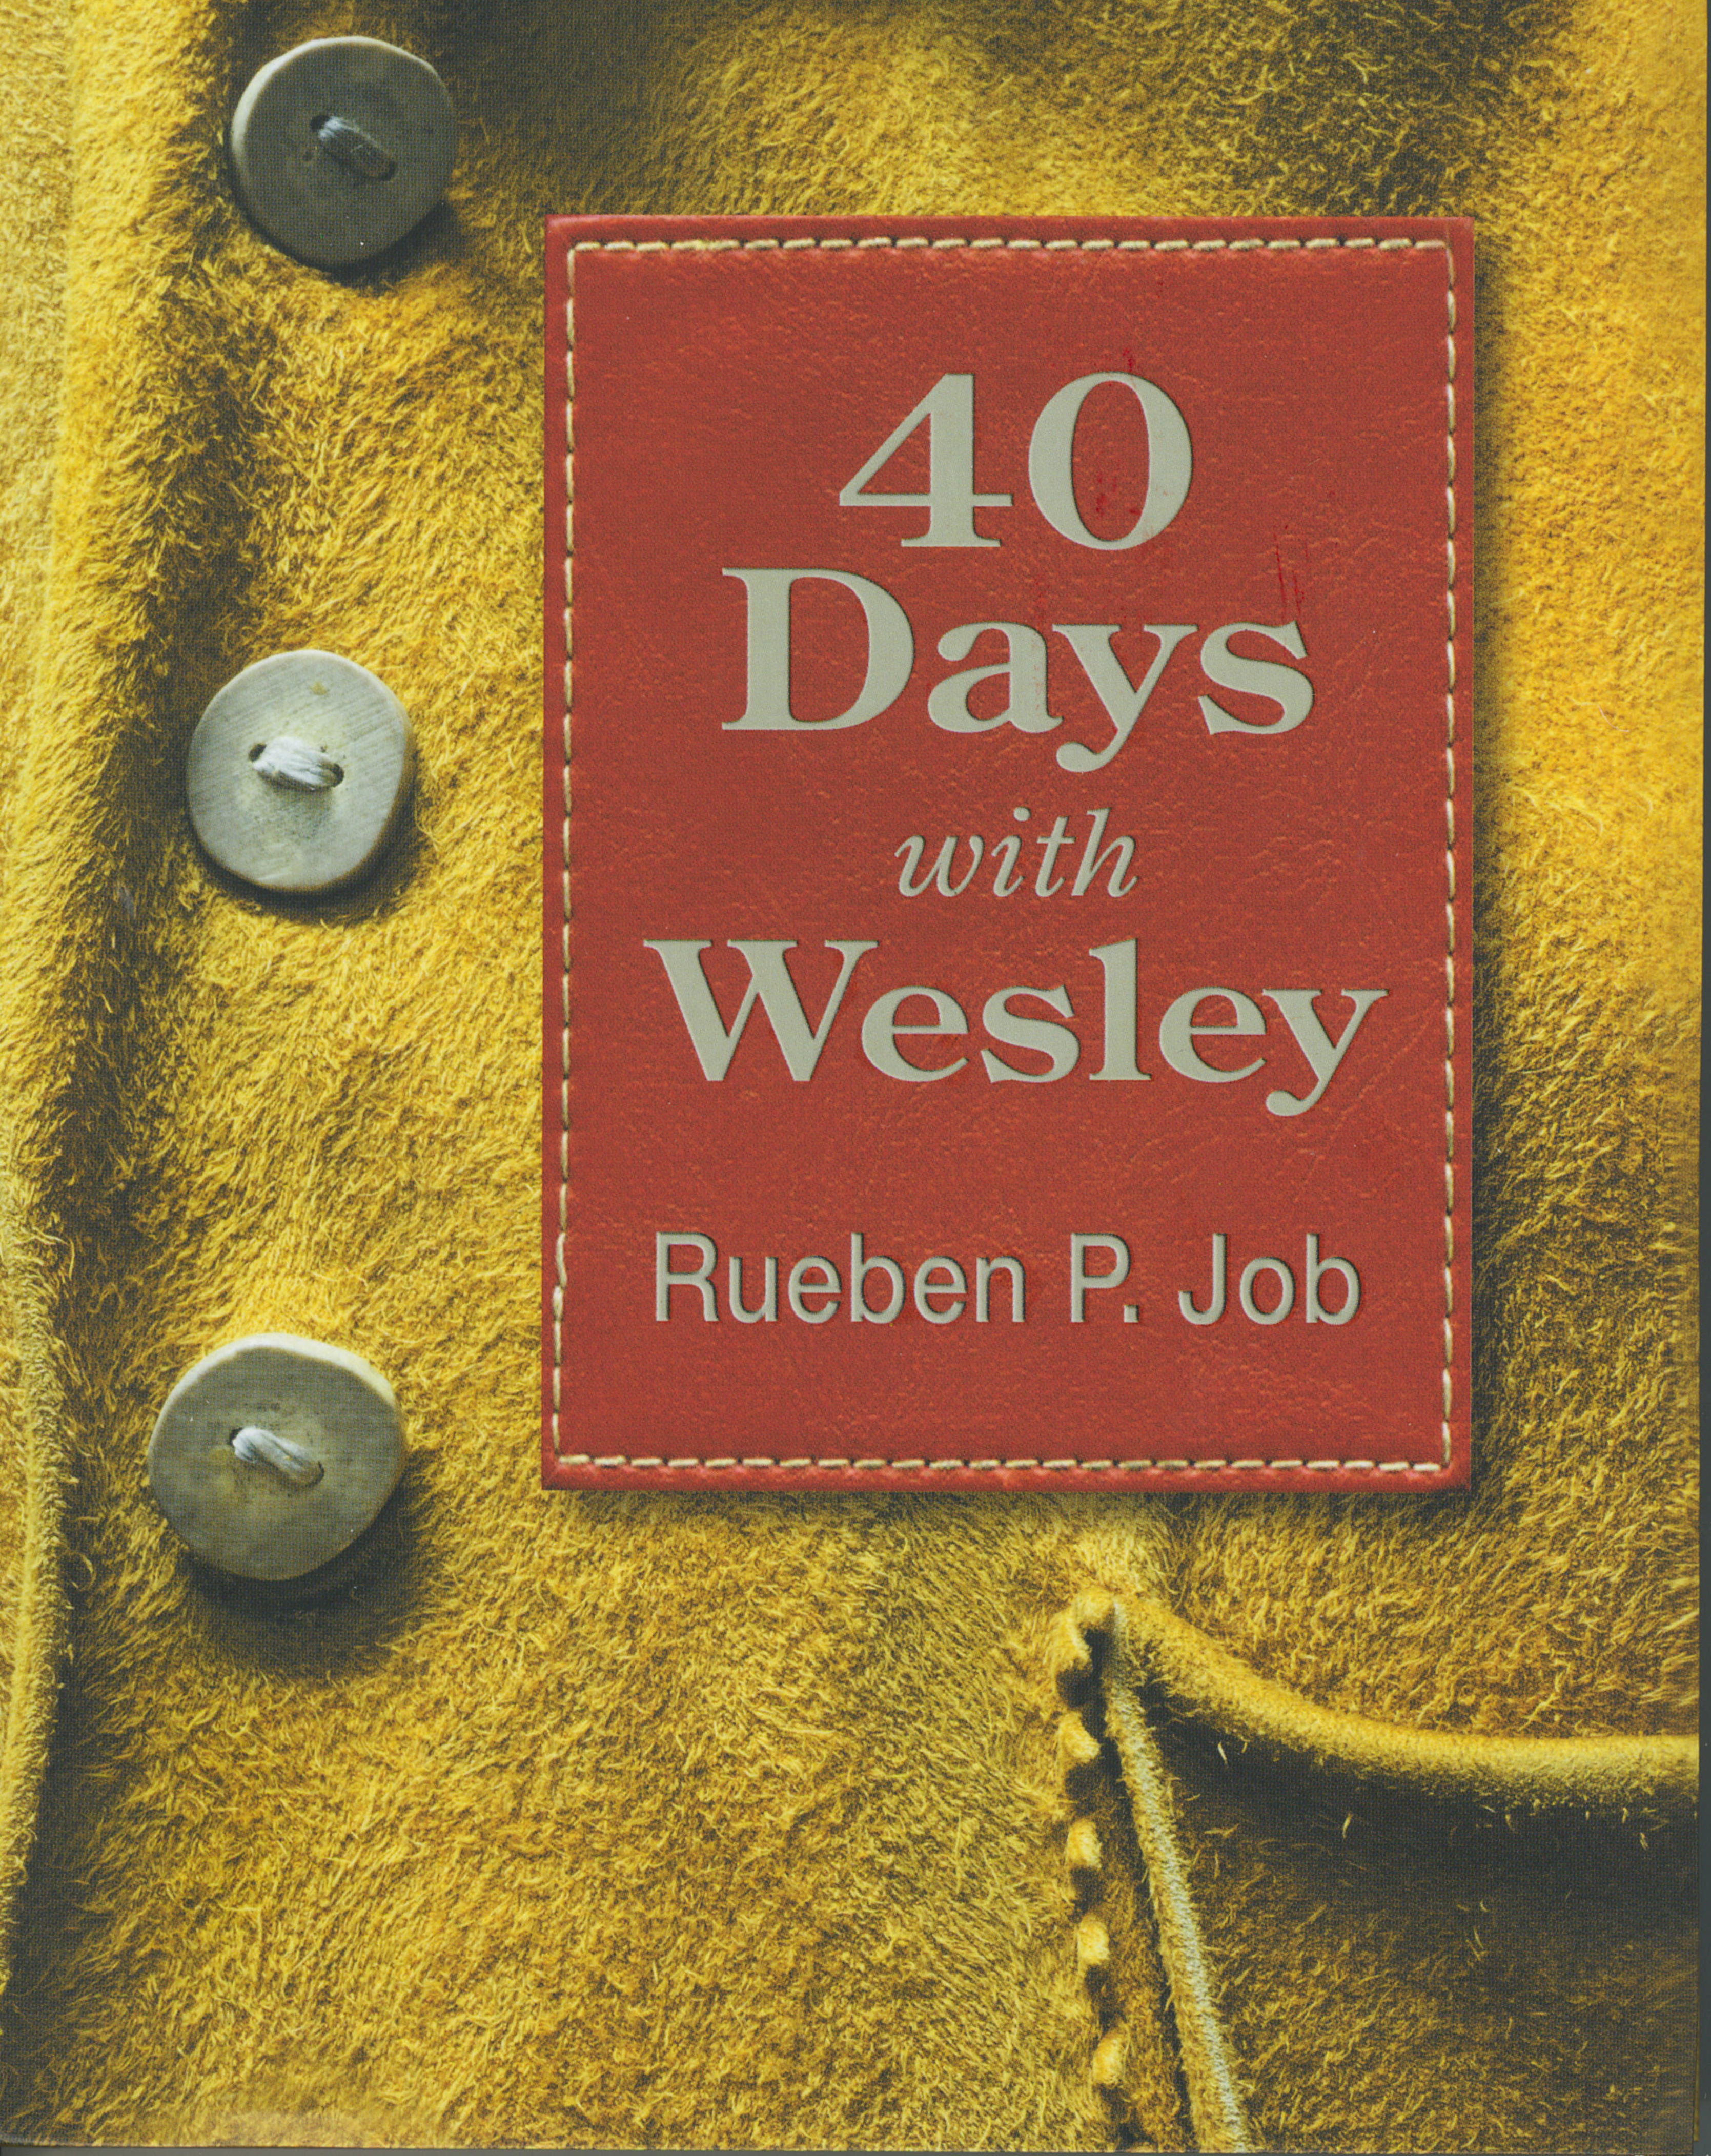 40 Days with Wesley by Reuben P. Job 108-9781501836015